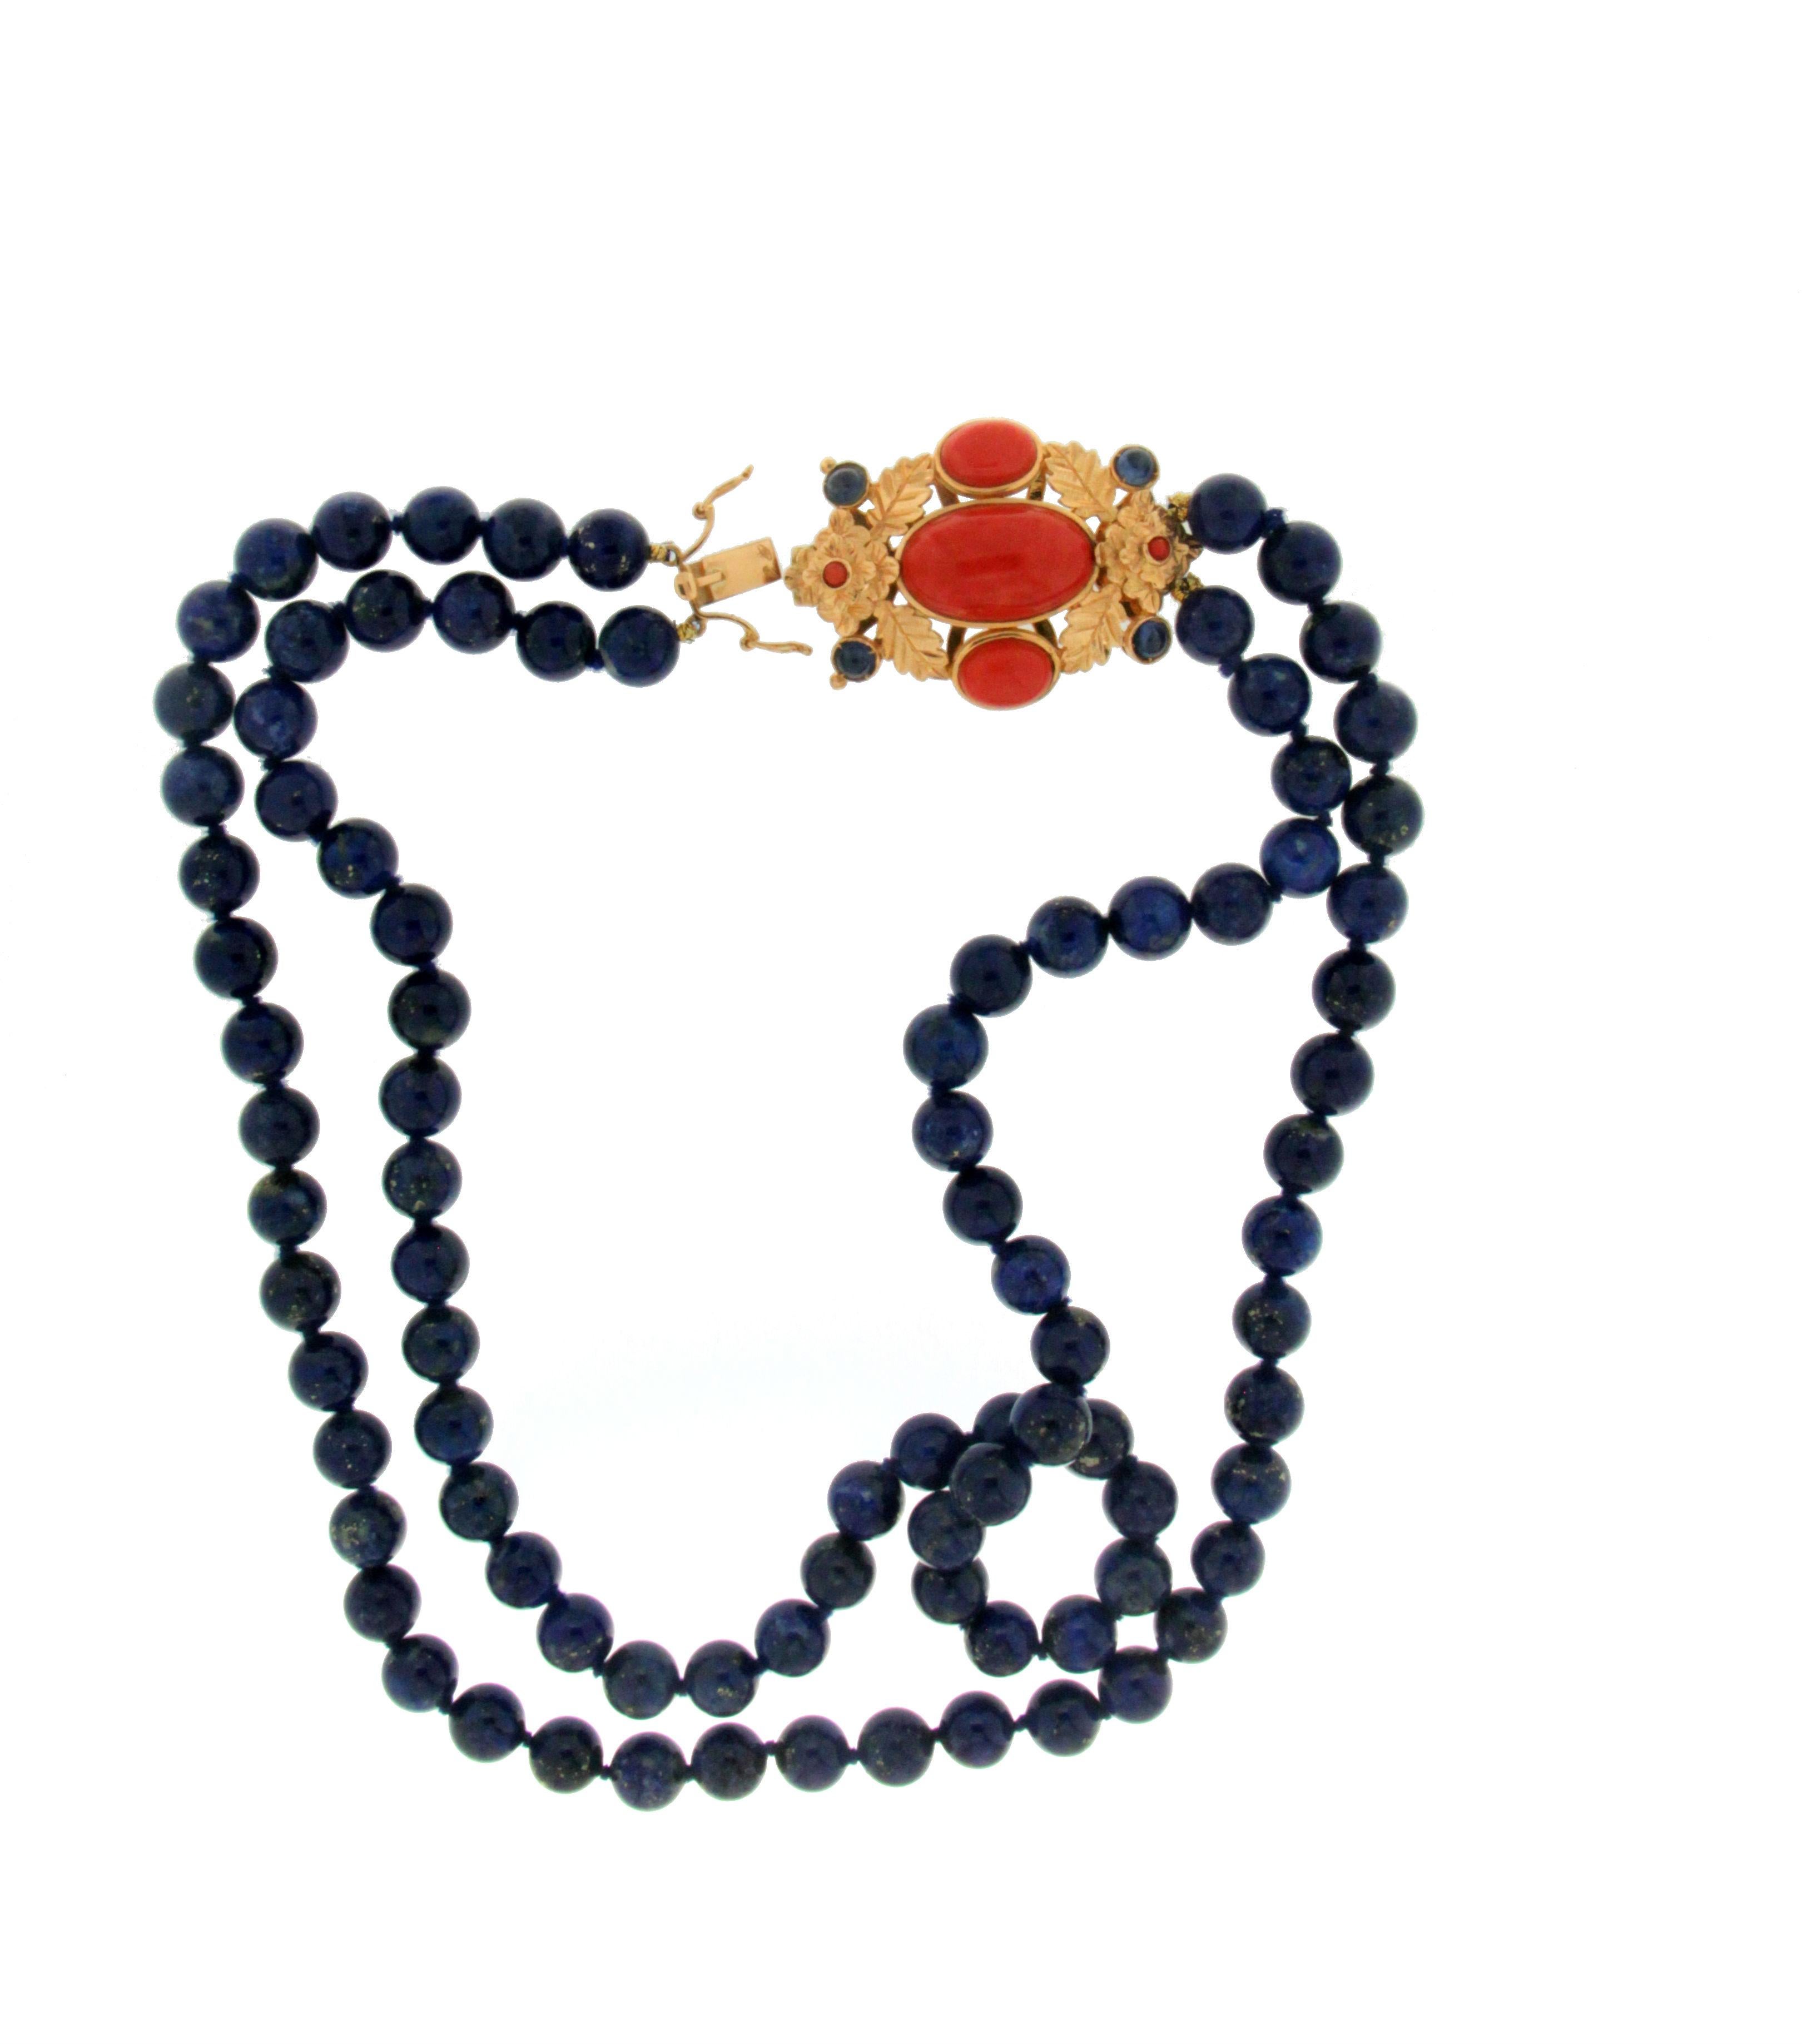 Lapis Lazuli 18 karat yellow gold with clasp mounted in coral and sapphires multi-strand necklace

Necklace total weight 120 grams
Coral weight 3.50 grams
Sapphires weight 2.05 karat
Each lapis lazuli is 0.90 cm
Necklace length 46 cm (Necklace open)
